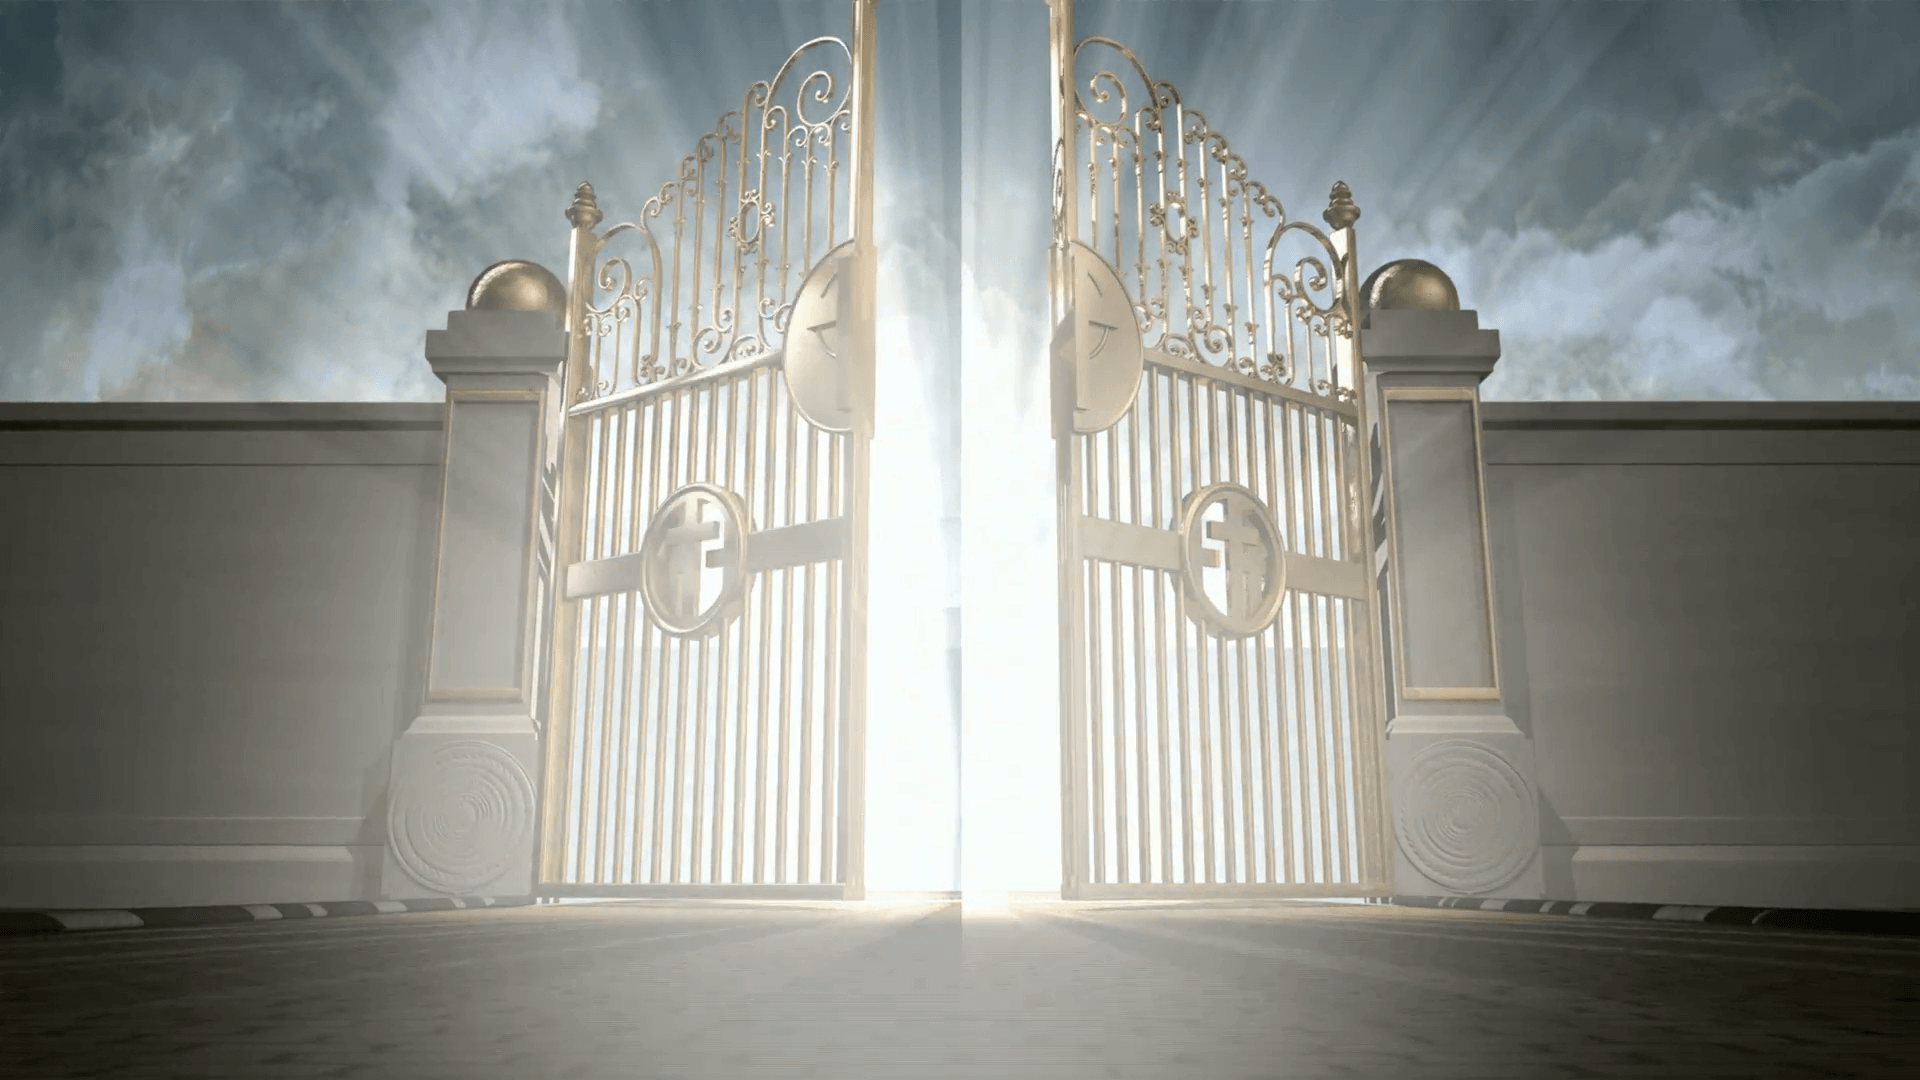 Heavens golden gates opening to an ethereal light on a cloudy